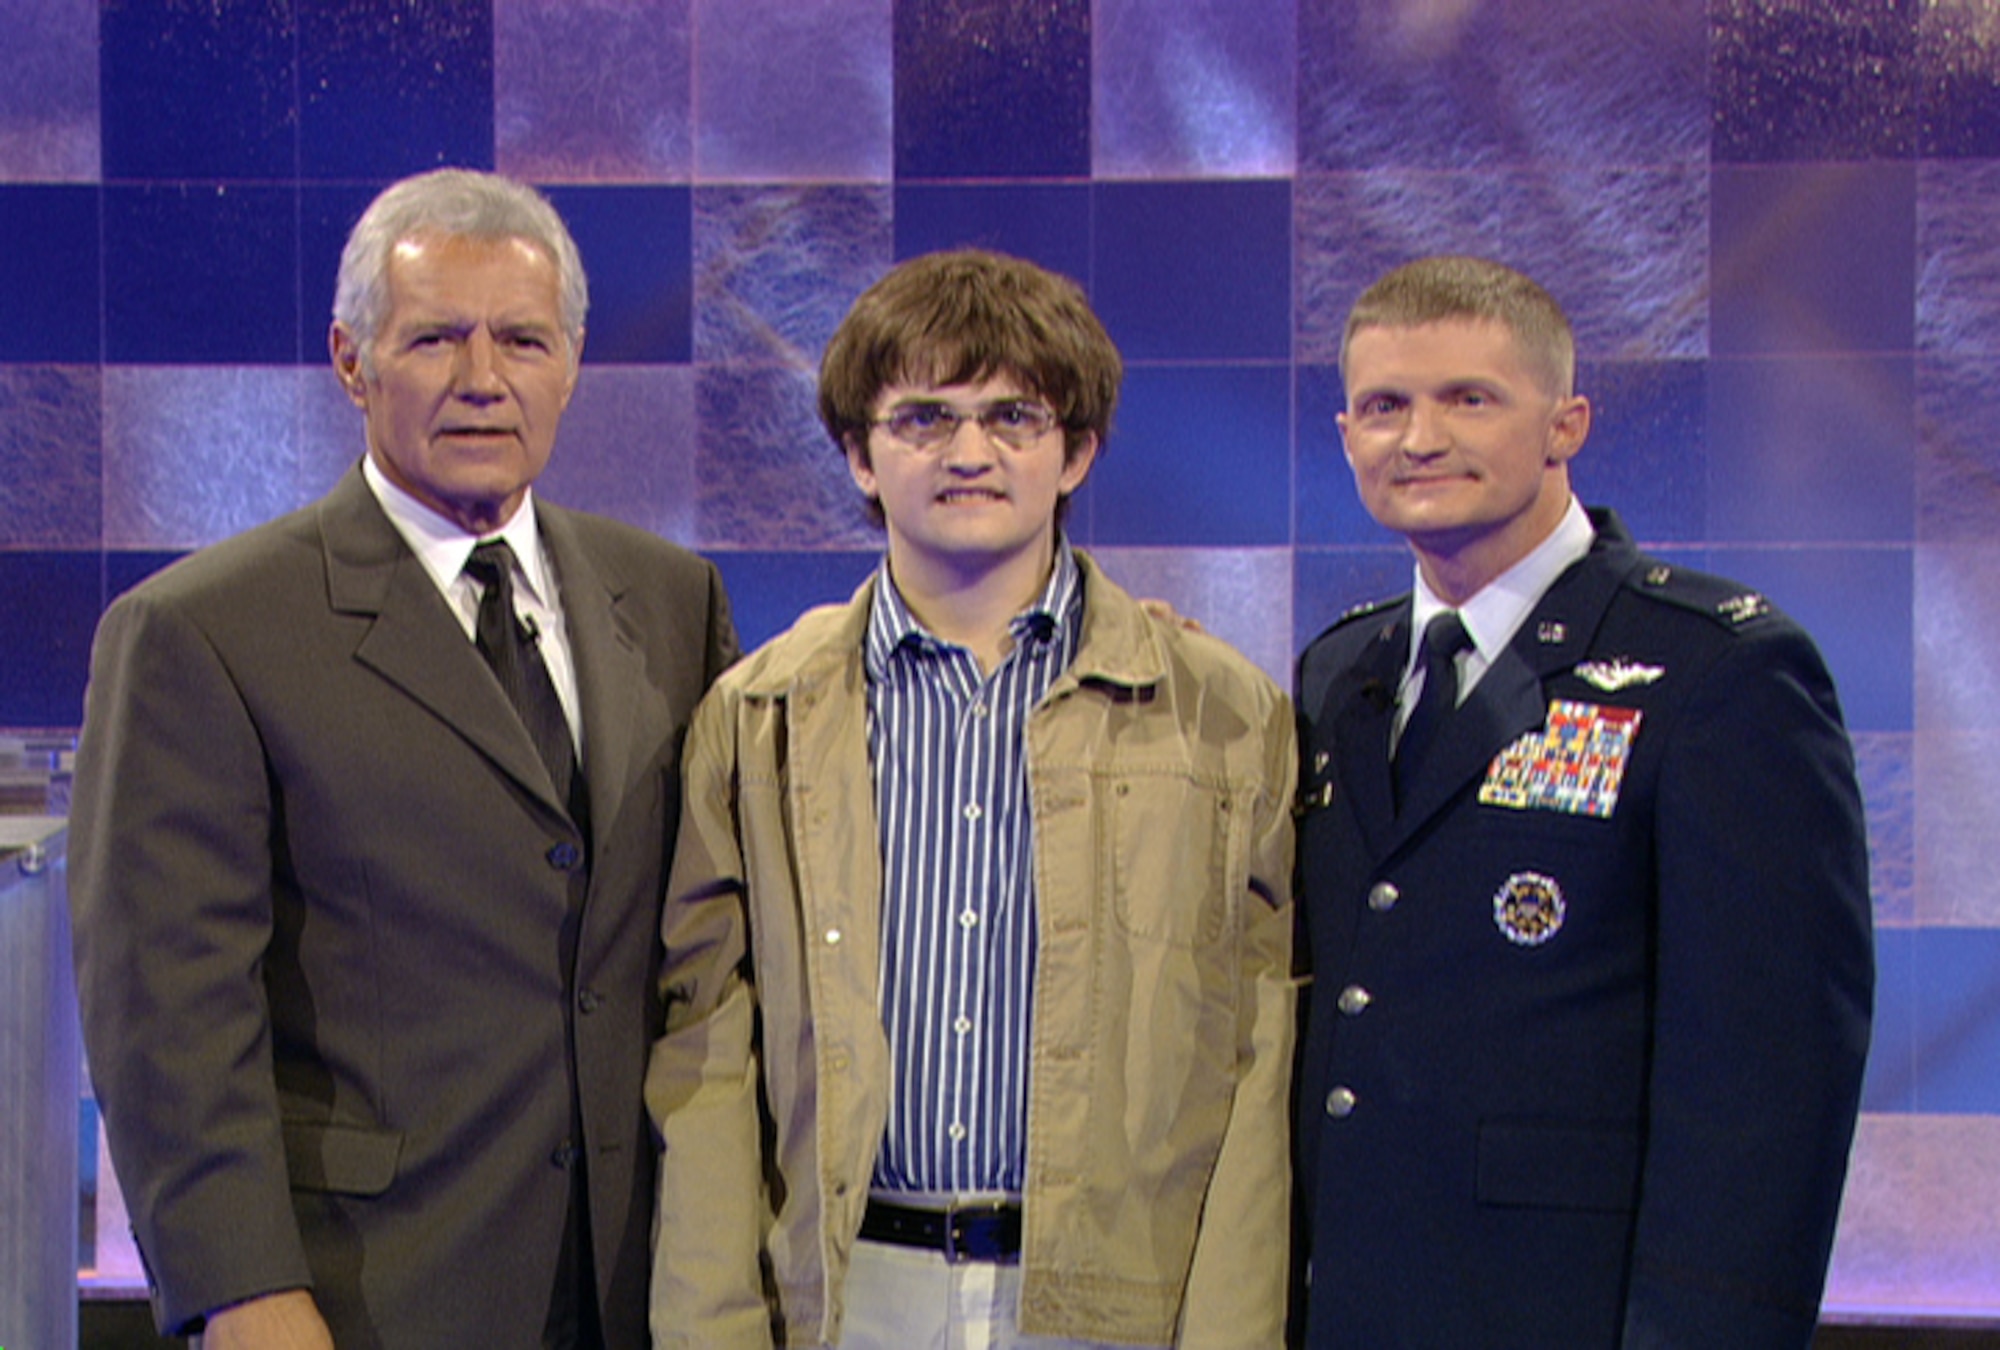 Col. Dave Belote (right) and his son, Drew (center) pose for a photo with Alex Trebek, the host of "Jeopardy!" while participating on an episode of the show Dec. 9, 2009, in Los Angeles. Colonel Belote is the 99th Air Base Wing commander at Nellis Air Force Base, Nev. (Courtesy photo)